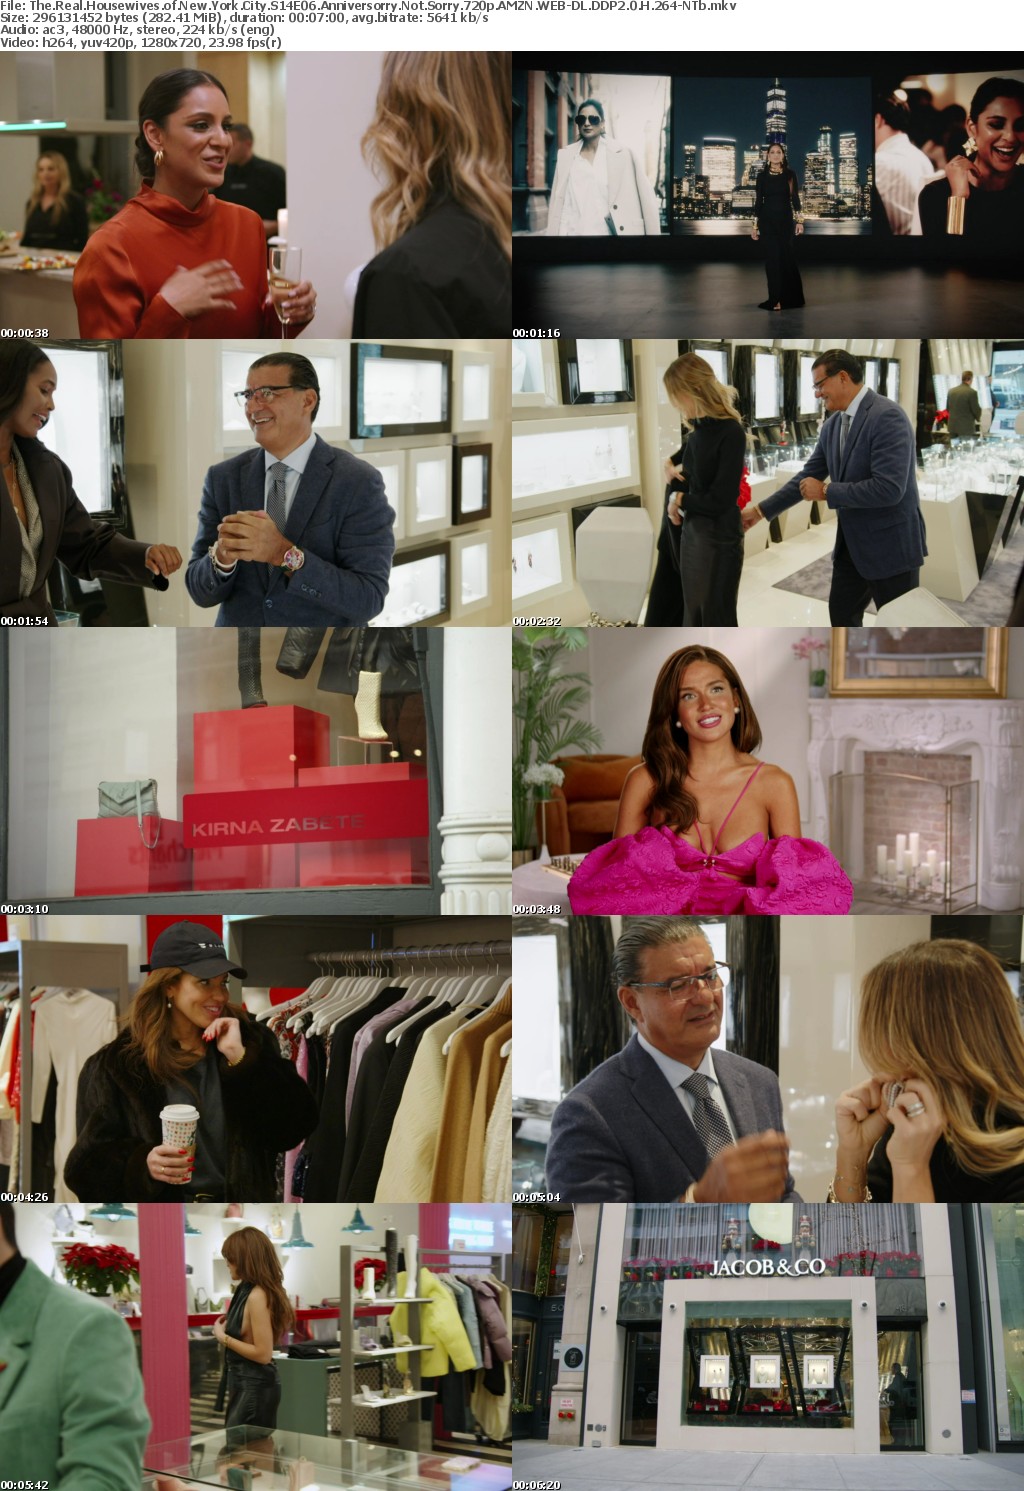 The Real Housewives of New York City S14E06 Anniversorry Not Sorry 720p AMZN WEB-DL DDP2 0 H 264-NTb